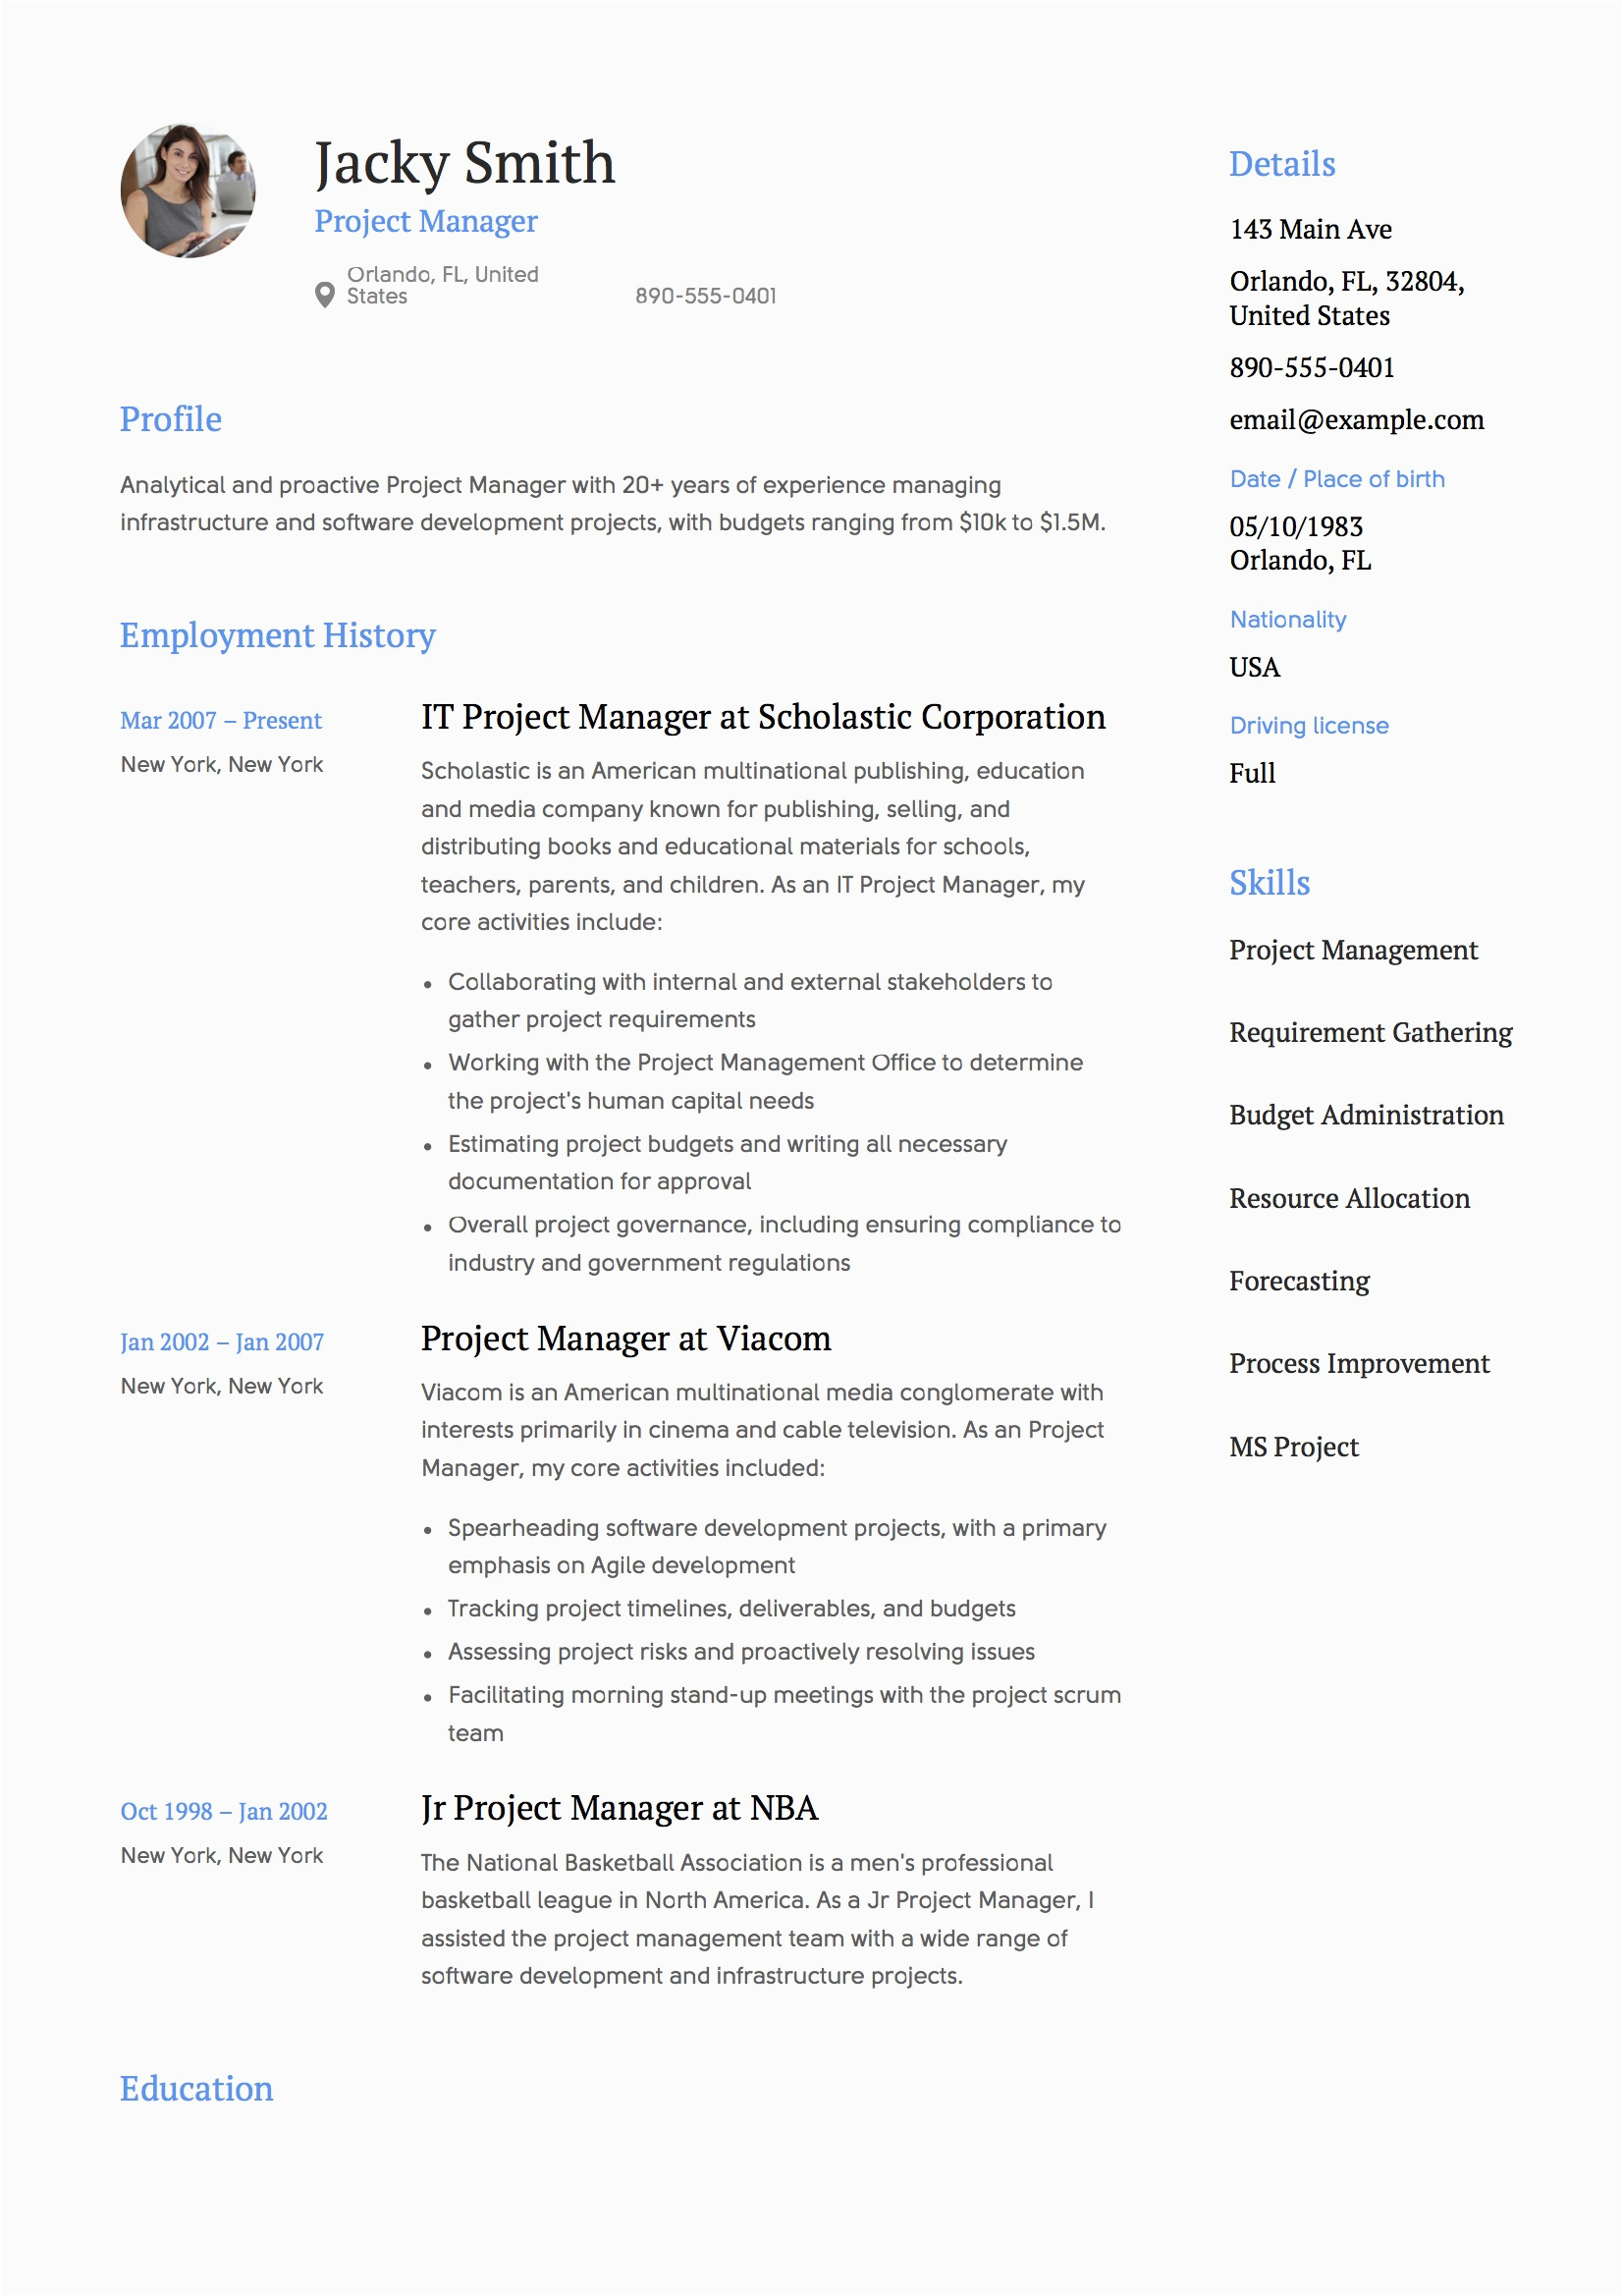 Sample Resume format for Project Manager Project Manager Resume & Full Guide